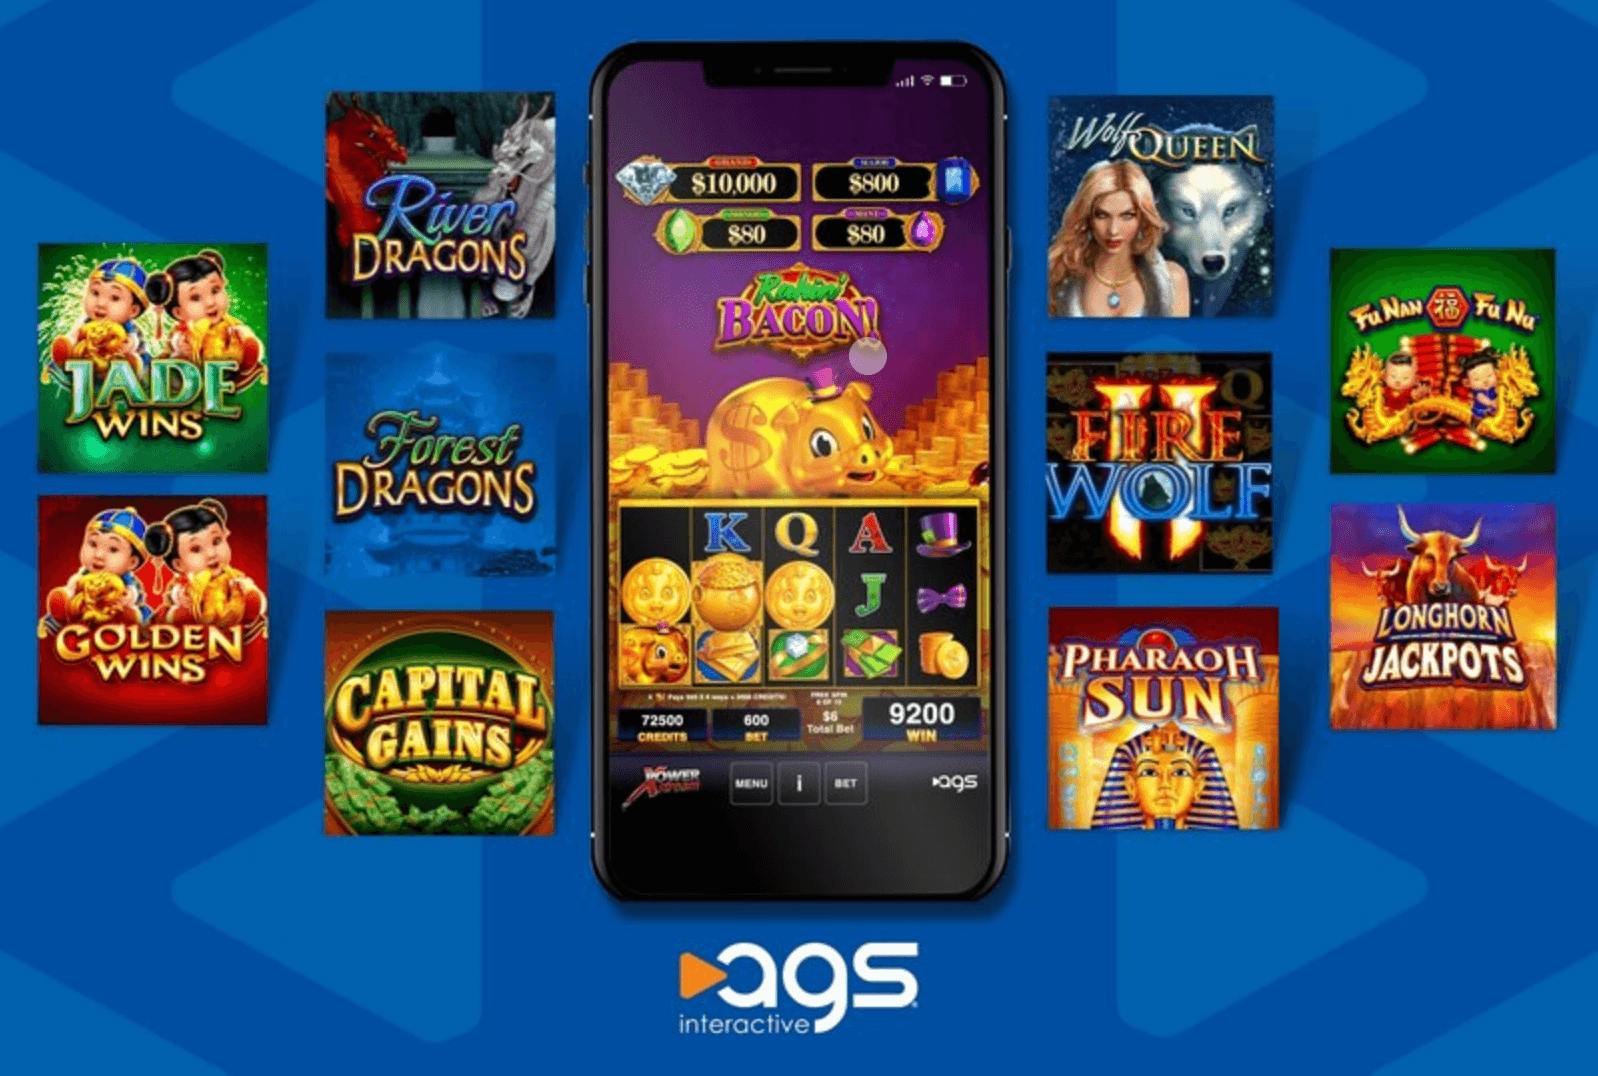 PlayAGS Signs Deal with Caesars Online Casino New Jersey for Gaming Content